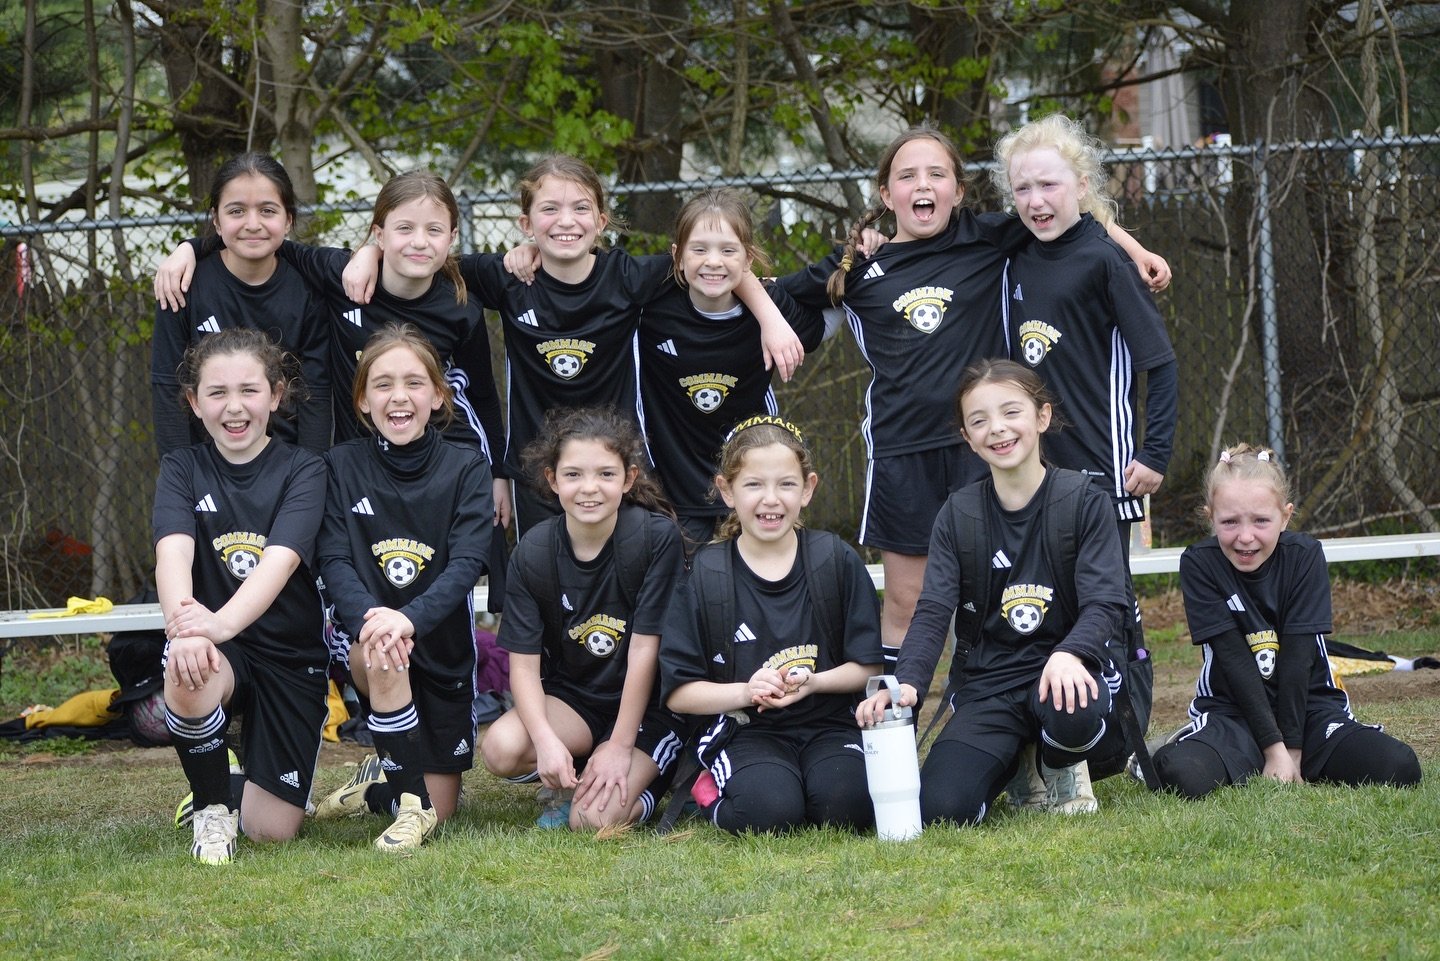 Congratulations to the Kraken on their nail-biting 5-4 victory via shootout in the LI Cup yesterday to advance to the quarter-finals. Keep up the great work, girls! 👏🏼⚽️ #CommackSoccer #CommackSoccerLeague